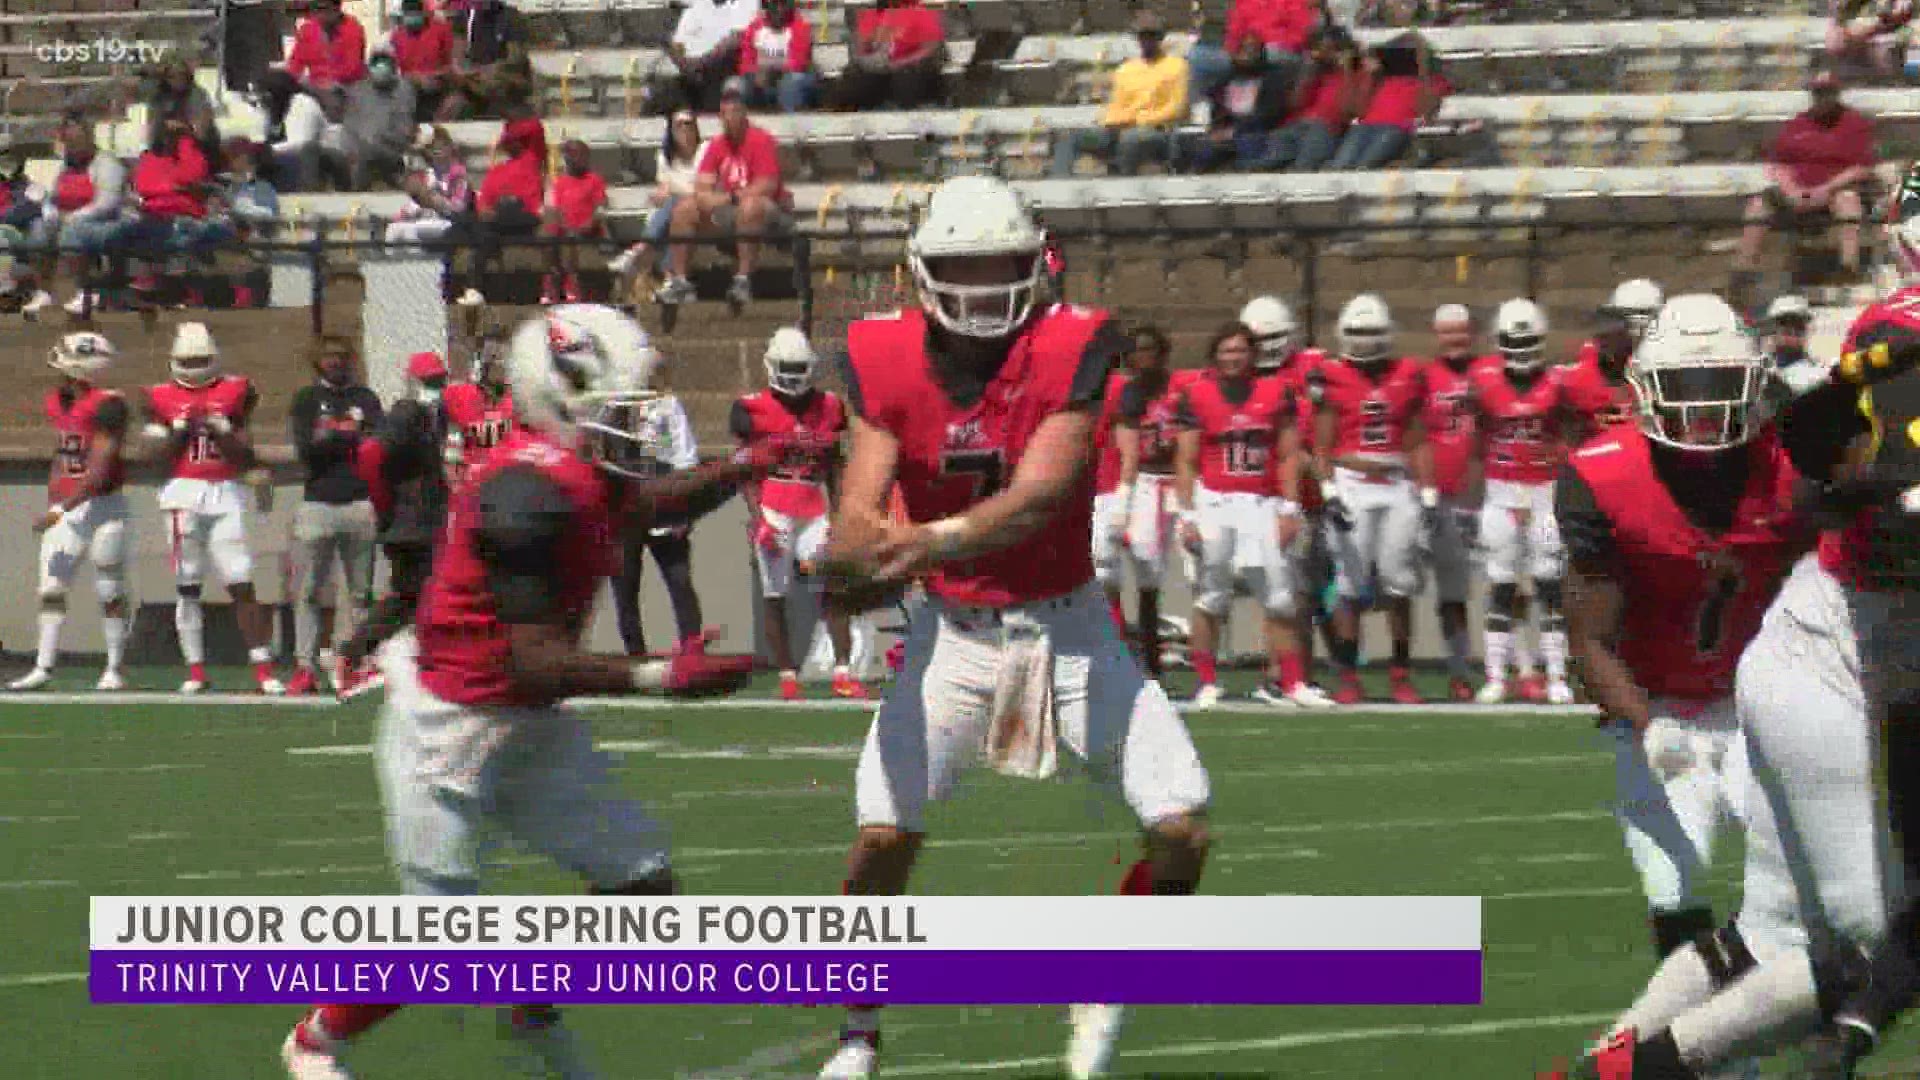 It was too much TVCC Friday afternoon as the Cardinals improved to 2-0 after a 42-10 victory over TJC